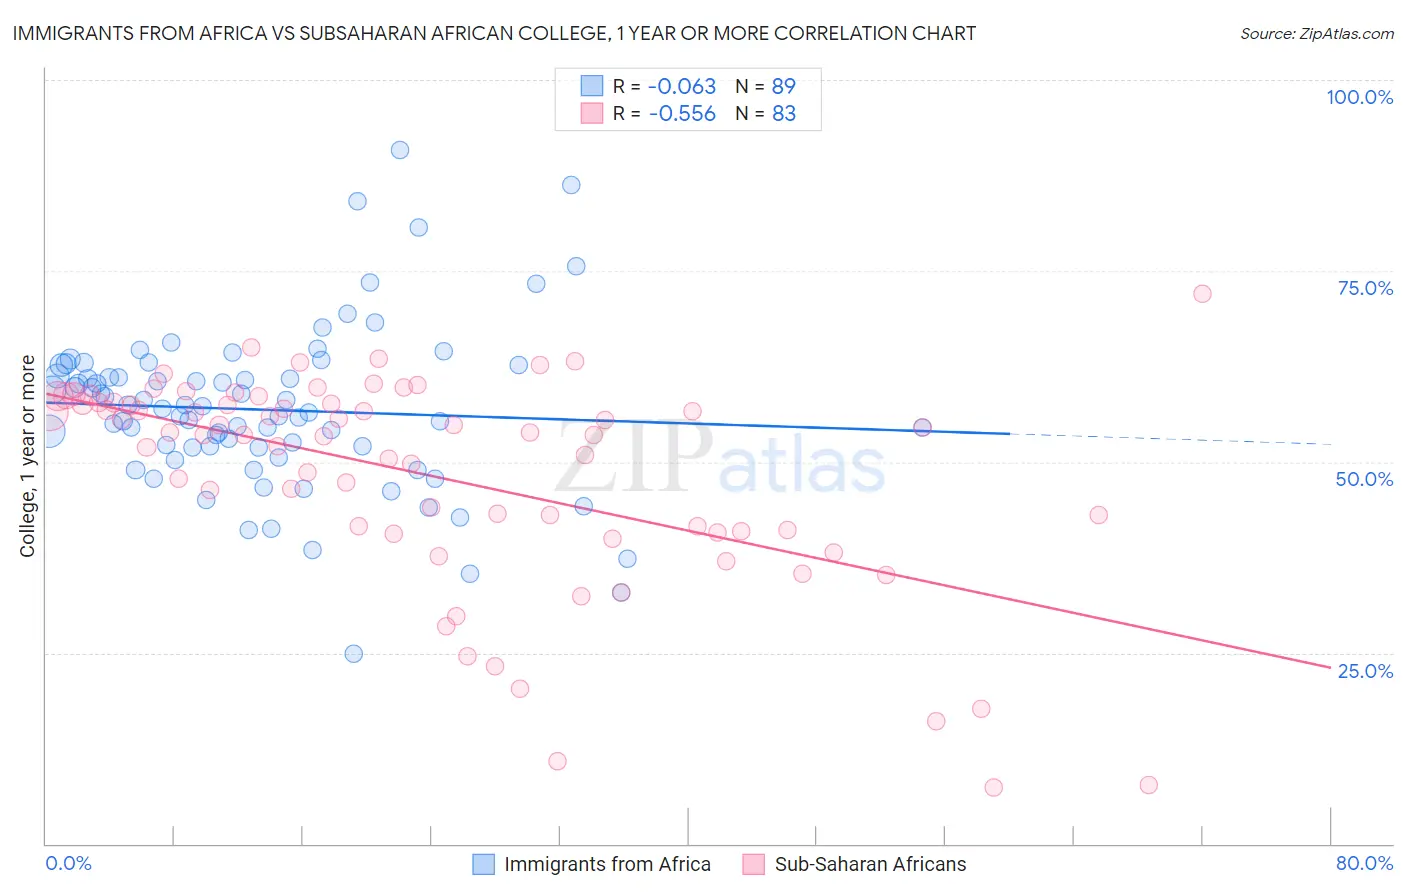 Immigrants from Africa vs Subsaharan African College, 1 year or more